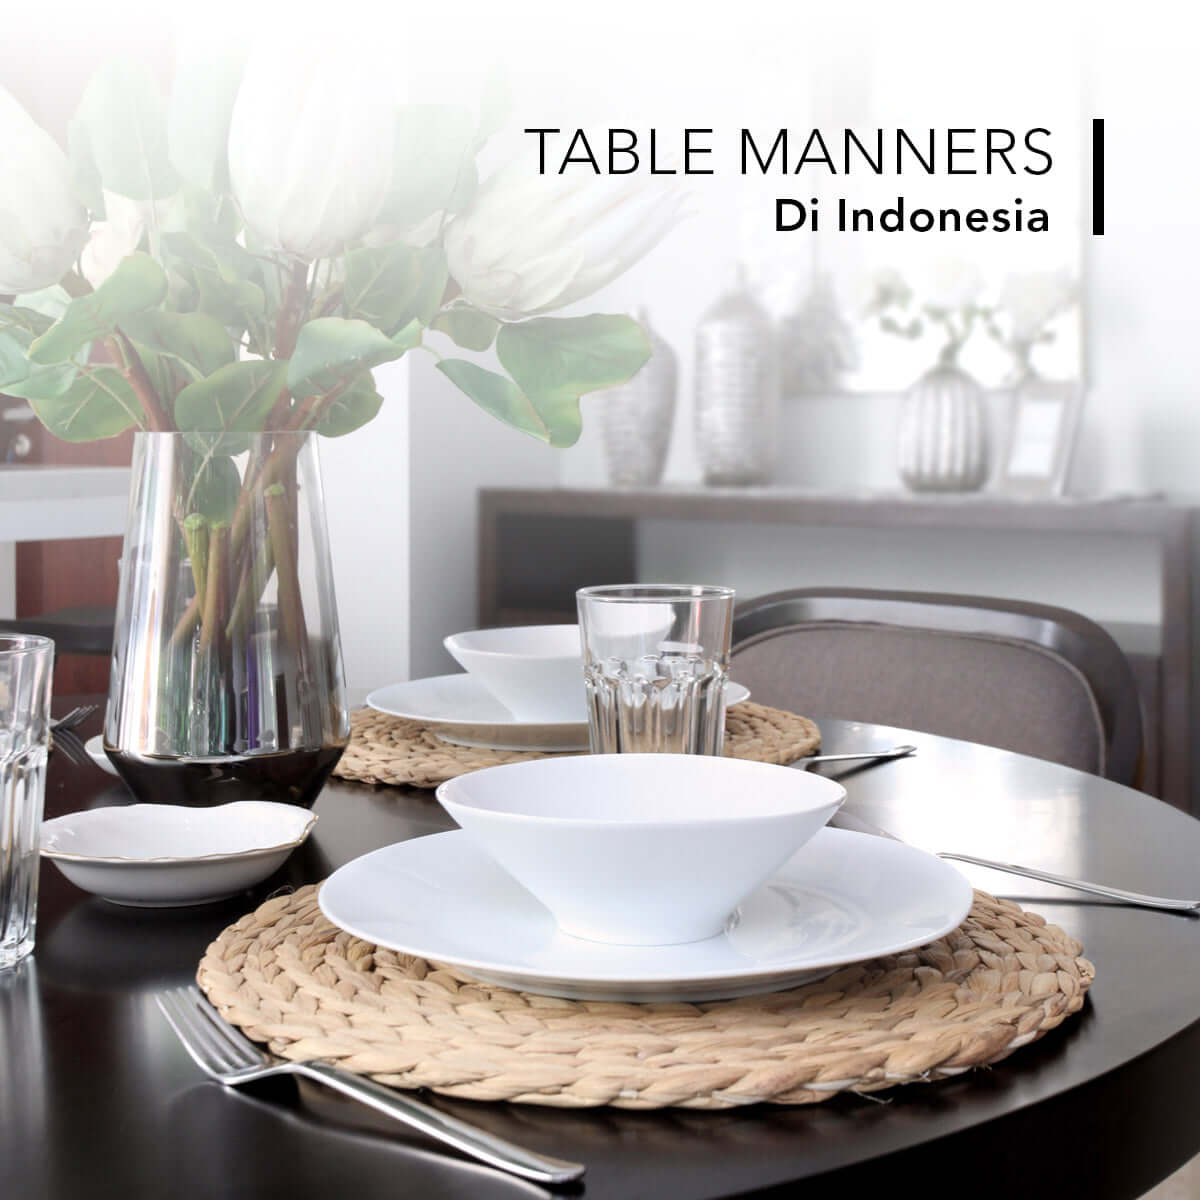 Table Manners di Indonesia